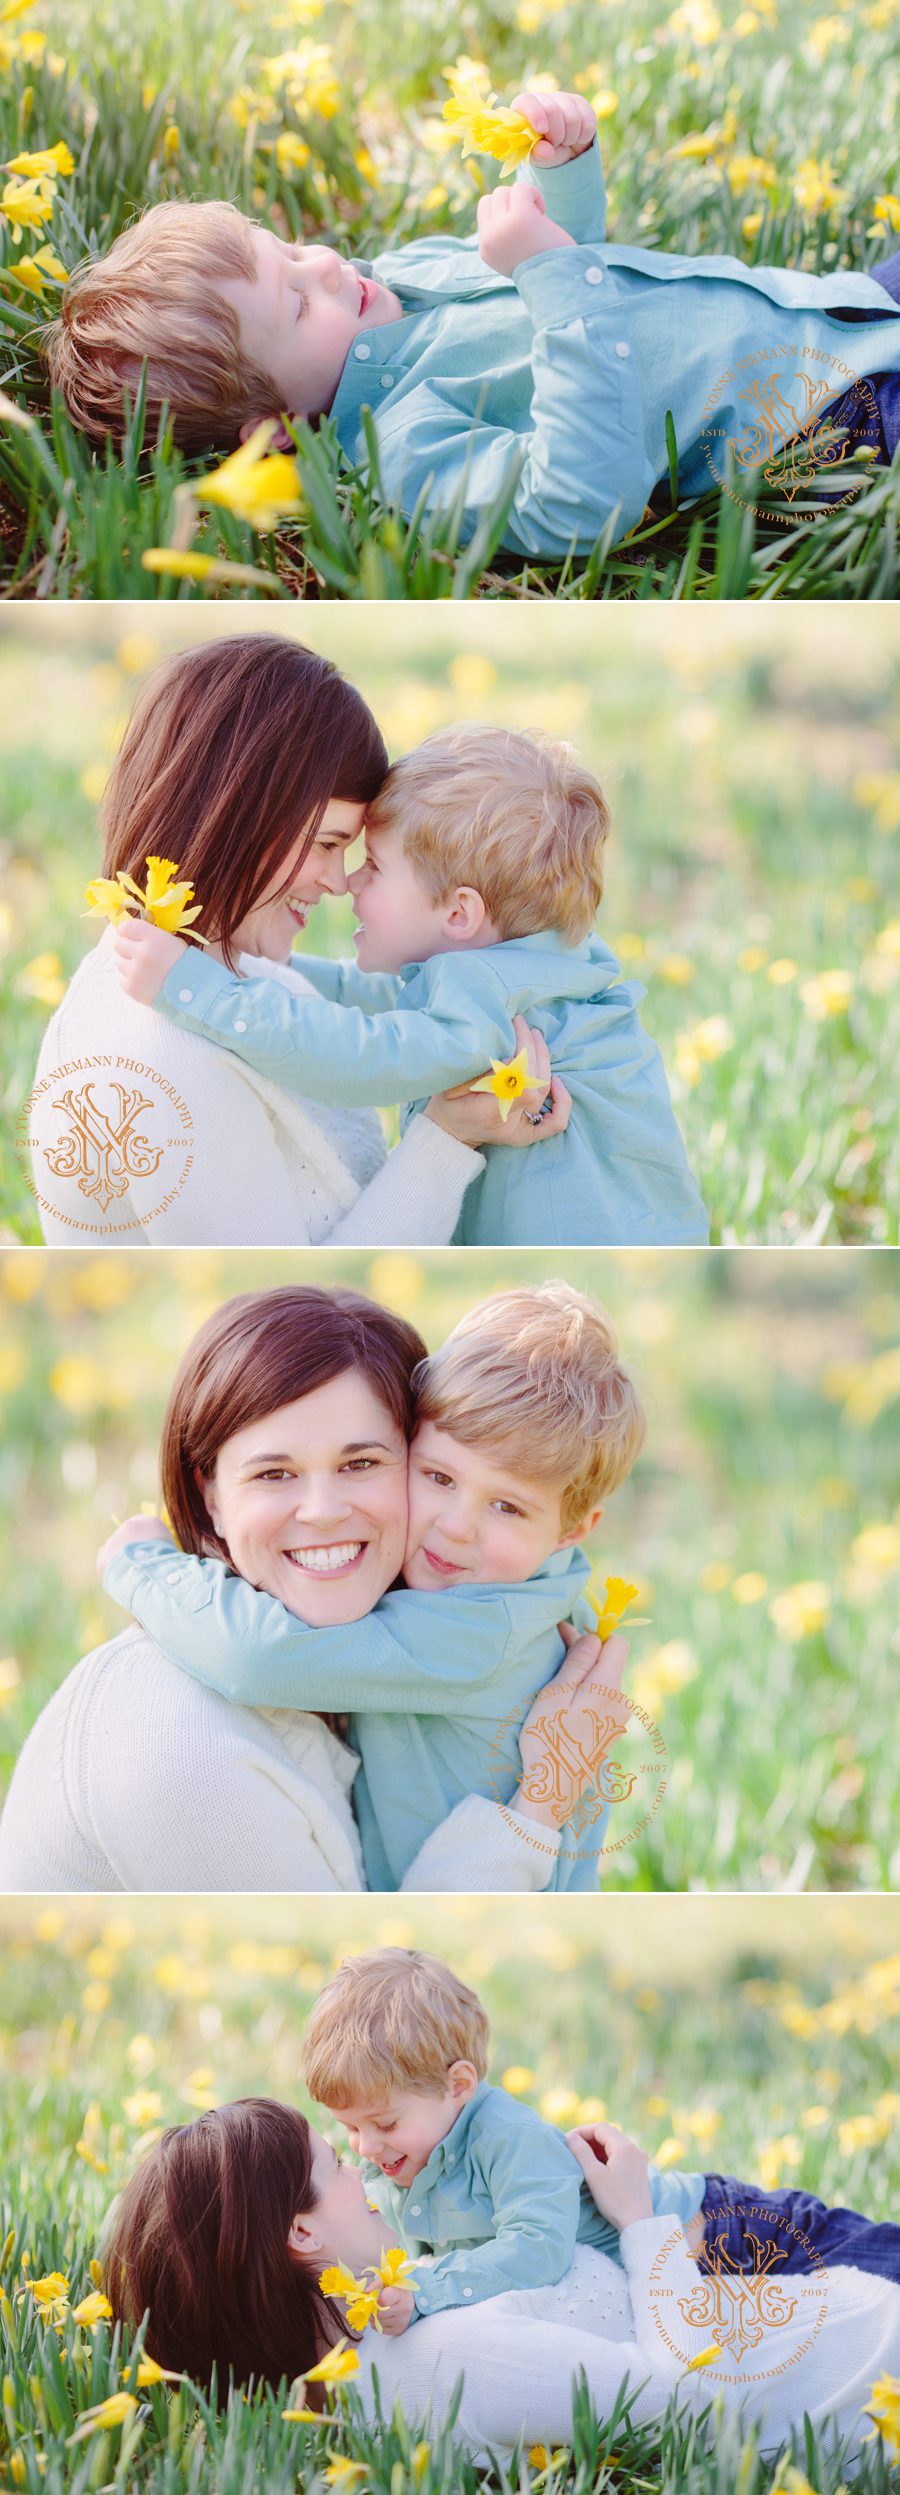 Mother and son playful photos in Watkinsville, GA among yellow flowers.